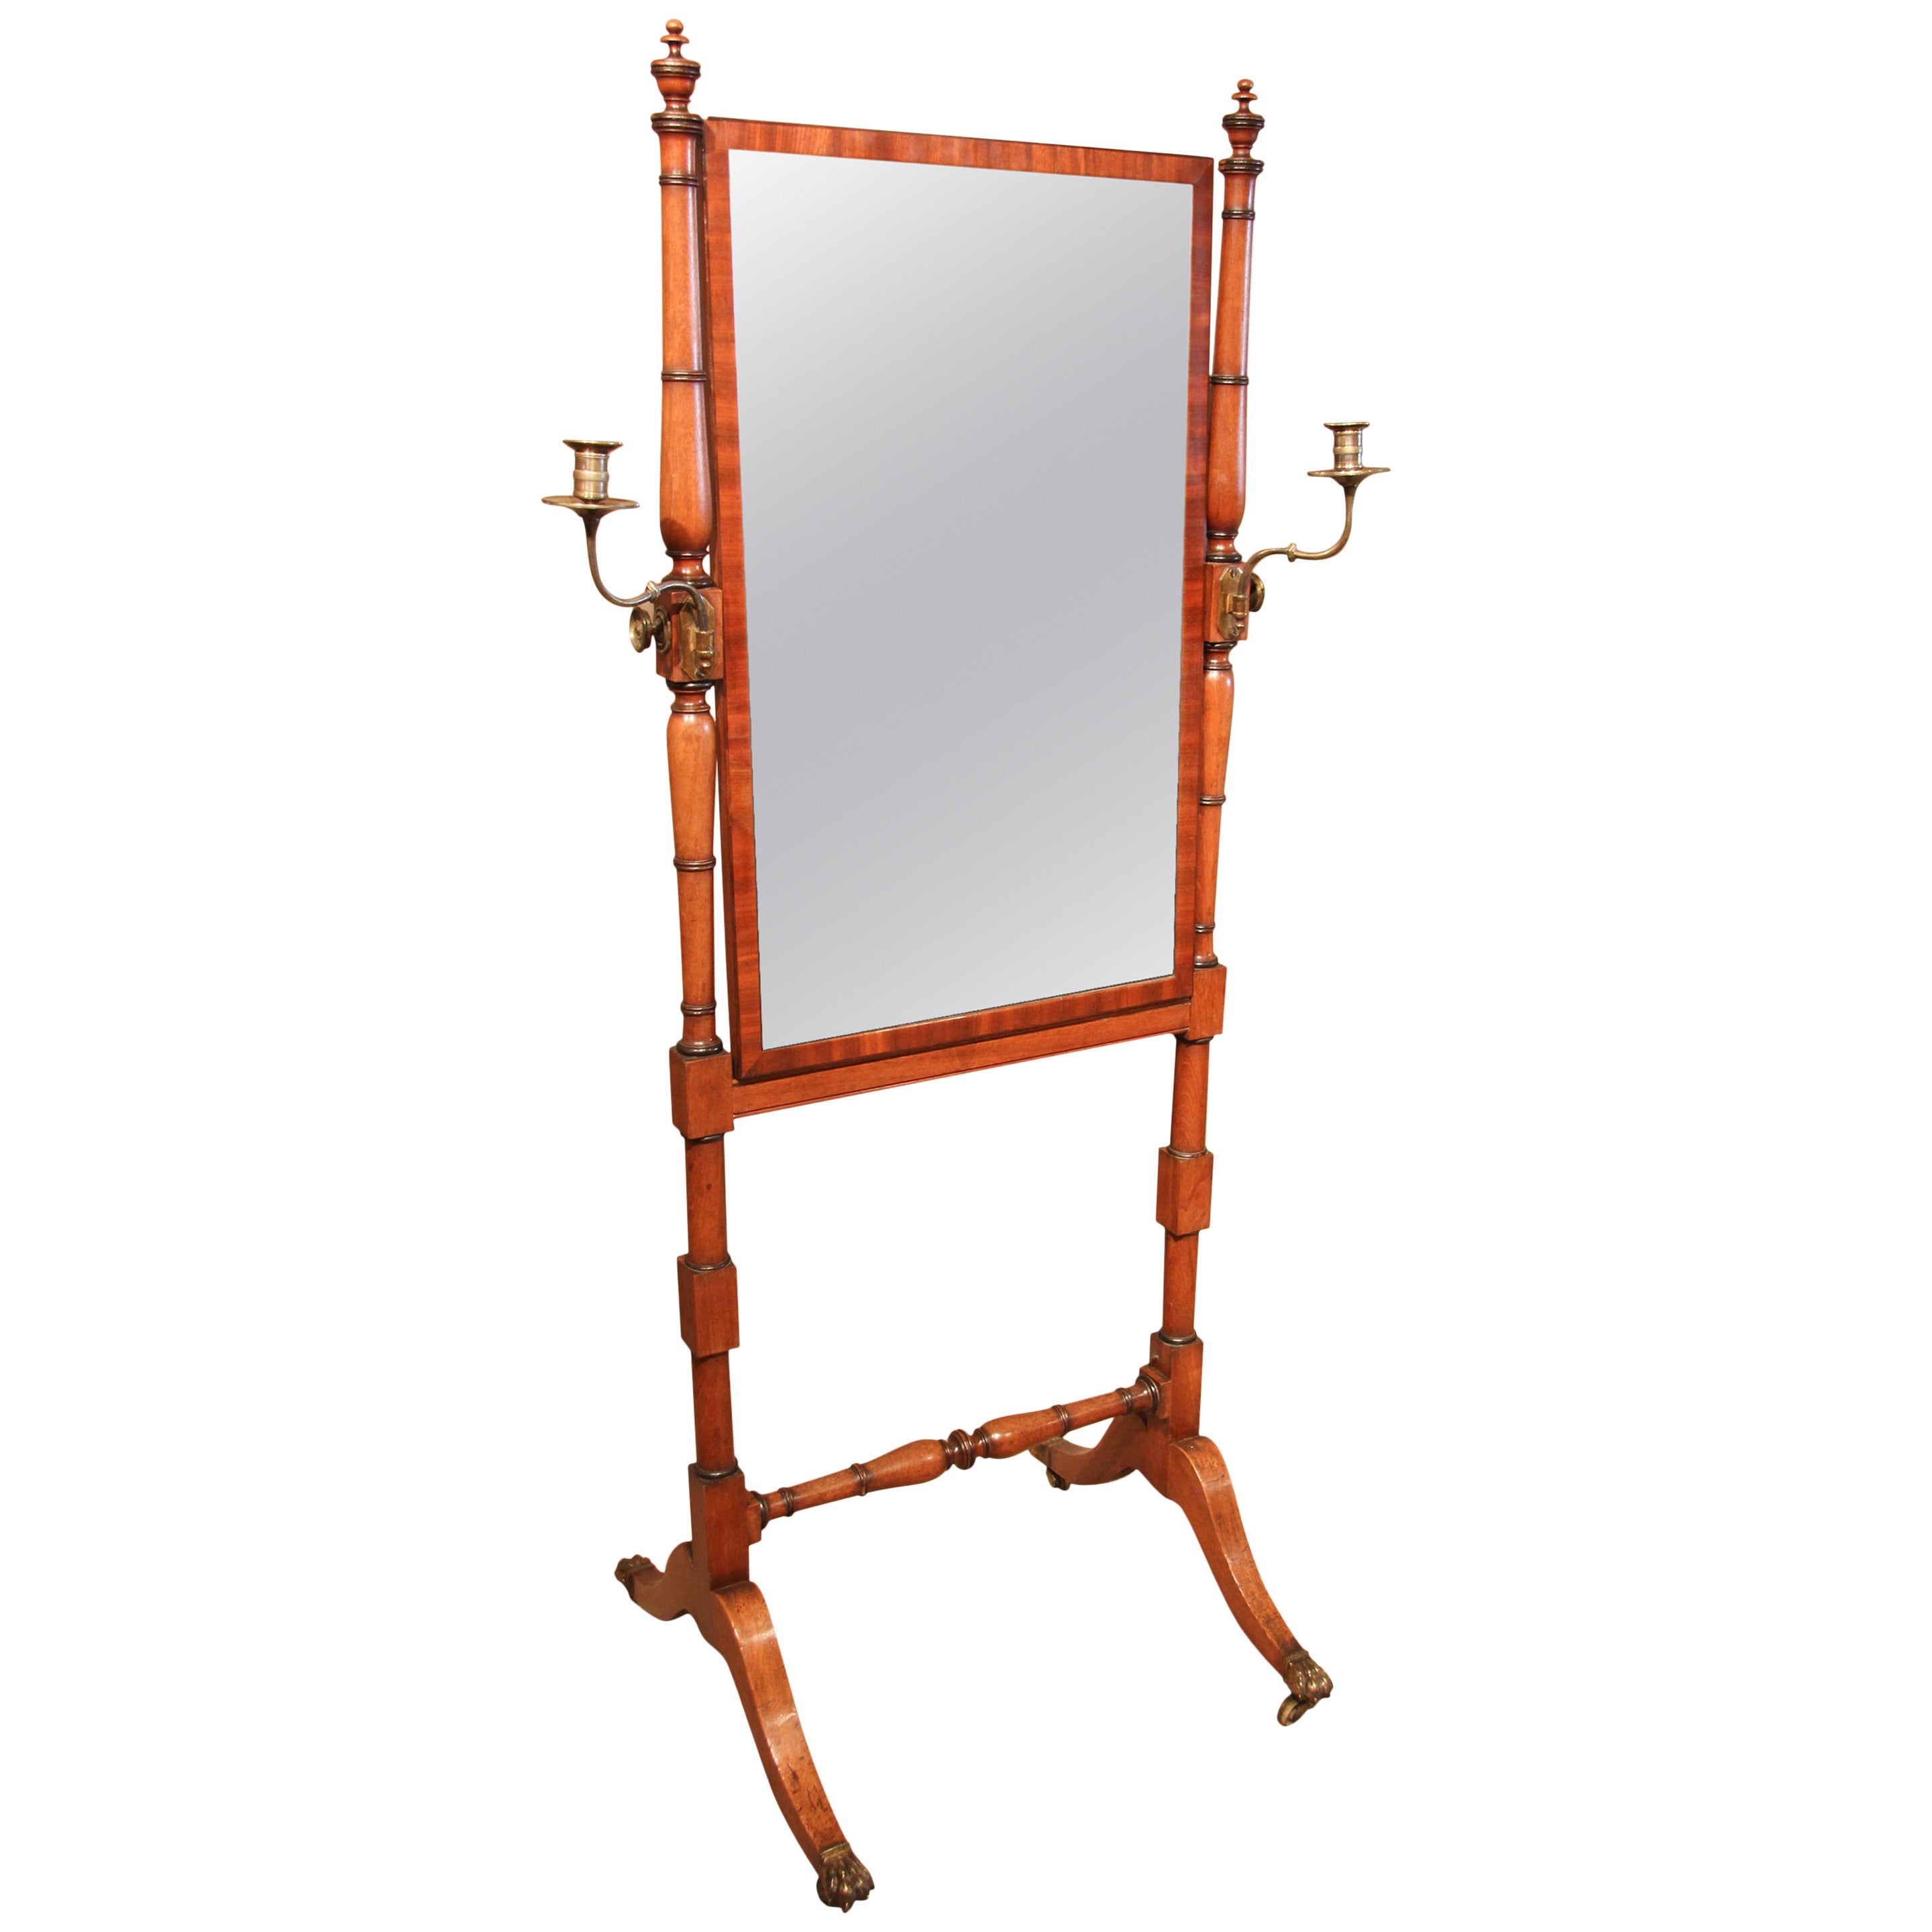 Rare Regency Period Mahogany Cheval Mirror with Candle Stands, circa 1810 For Sale